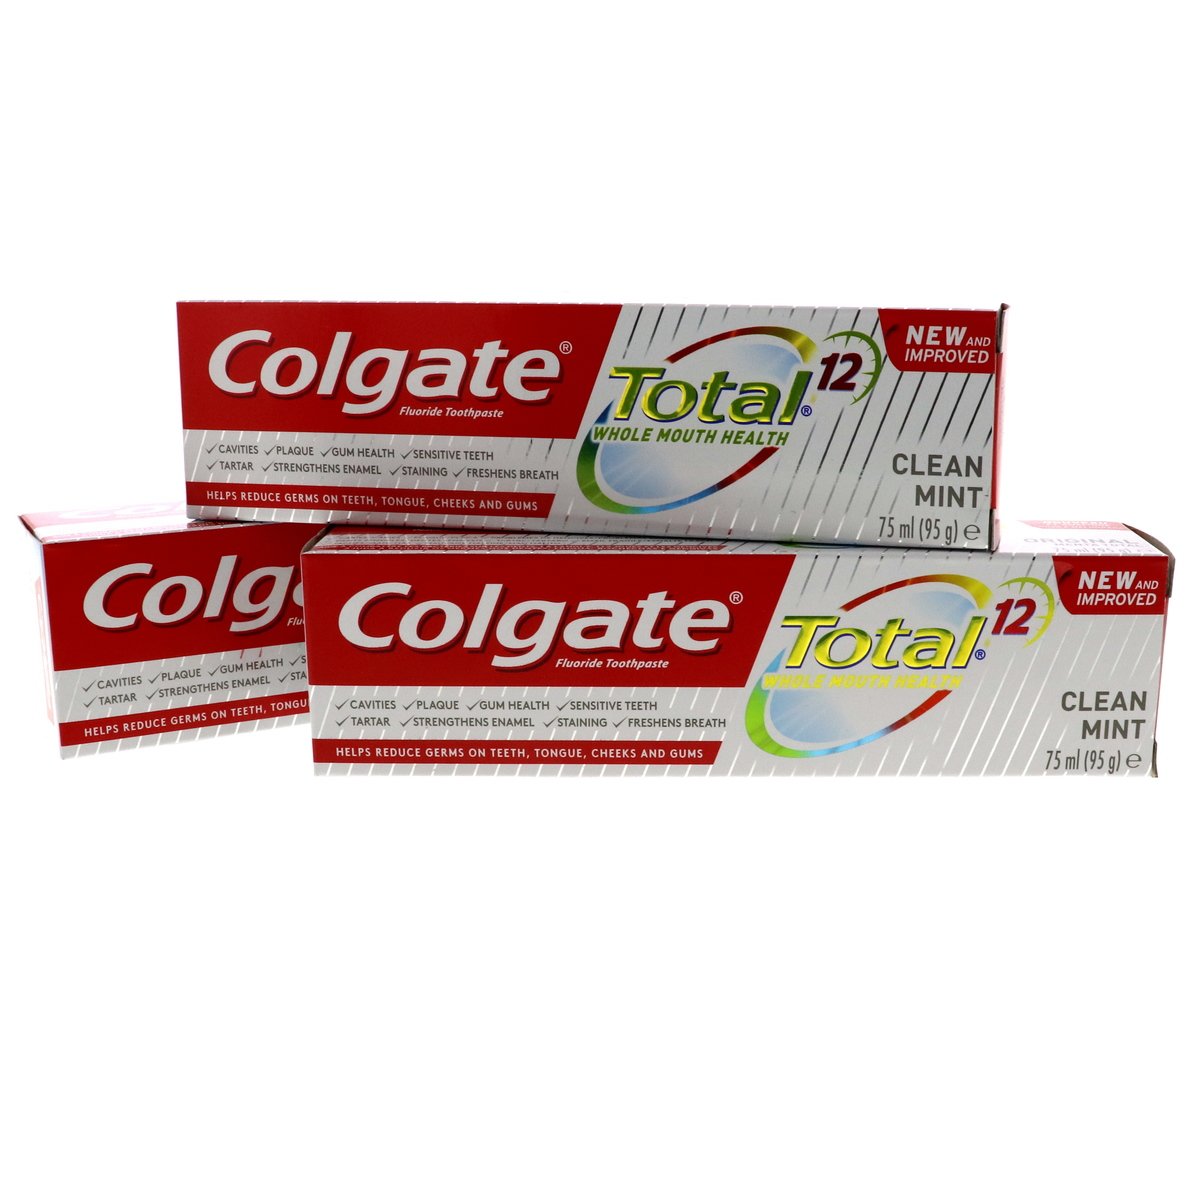 Colgate Fluoride Toothpaste Total Clean Mint 3 x 75 ml